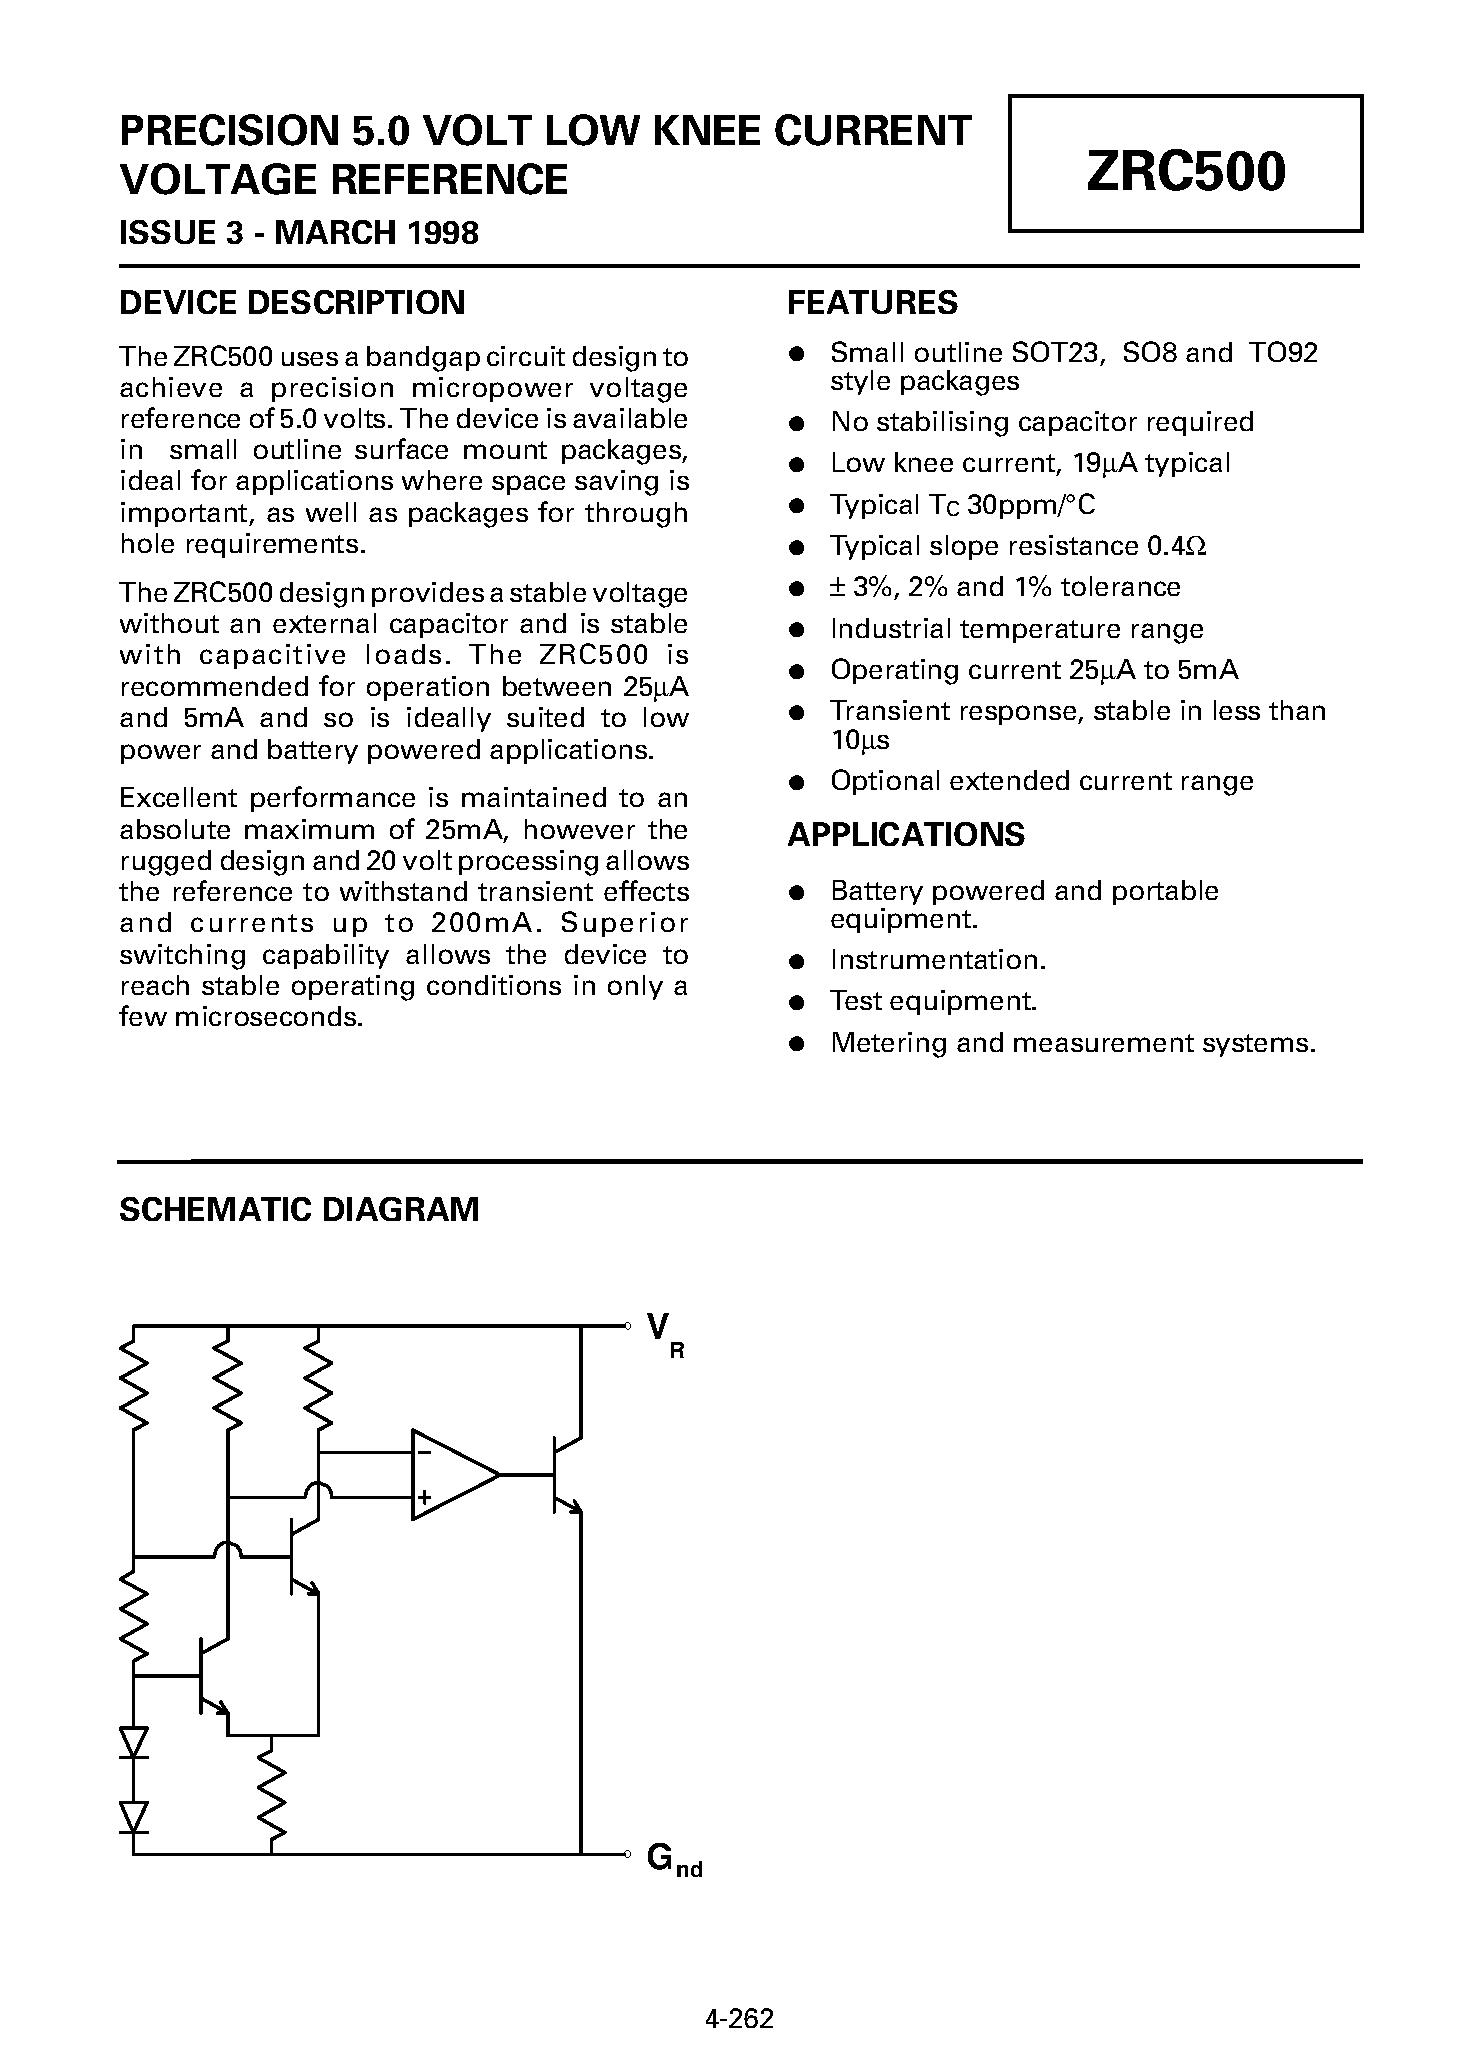 Datasheet ZRC500N803 - PRECISION 5.0 VOLT LOW KNEE CURRENT VOLTAGE REFERENCE page 1